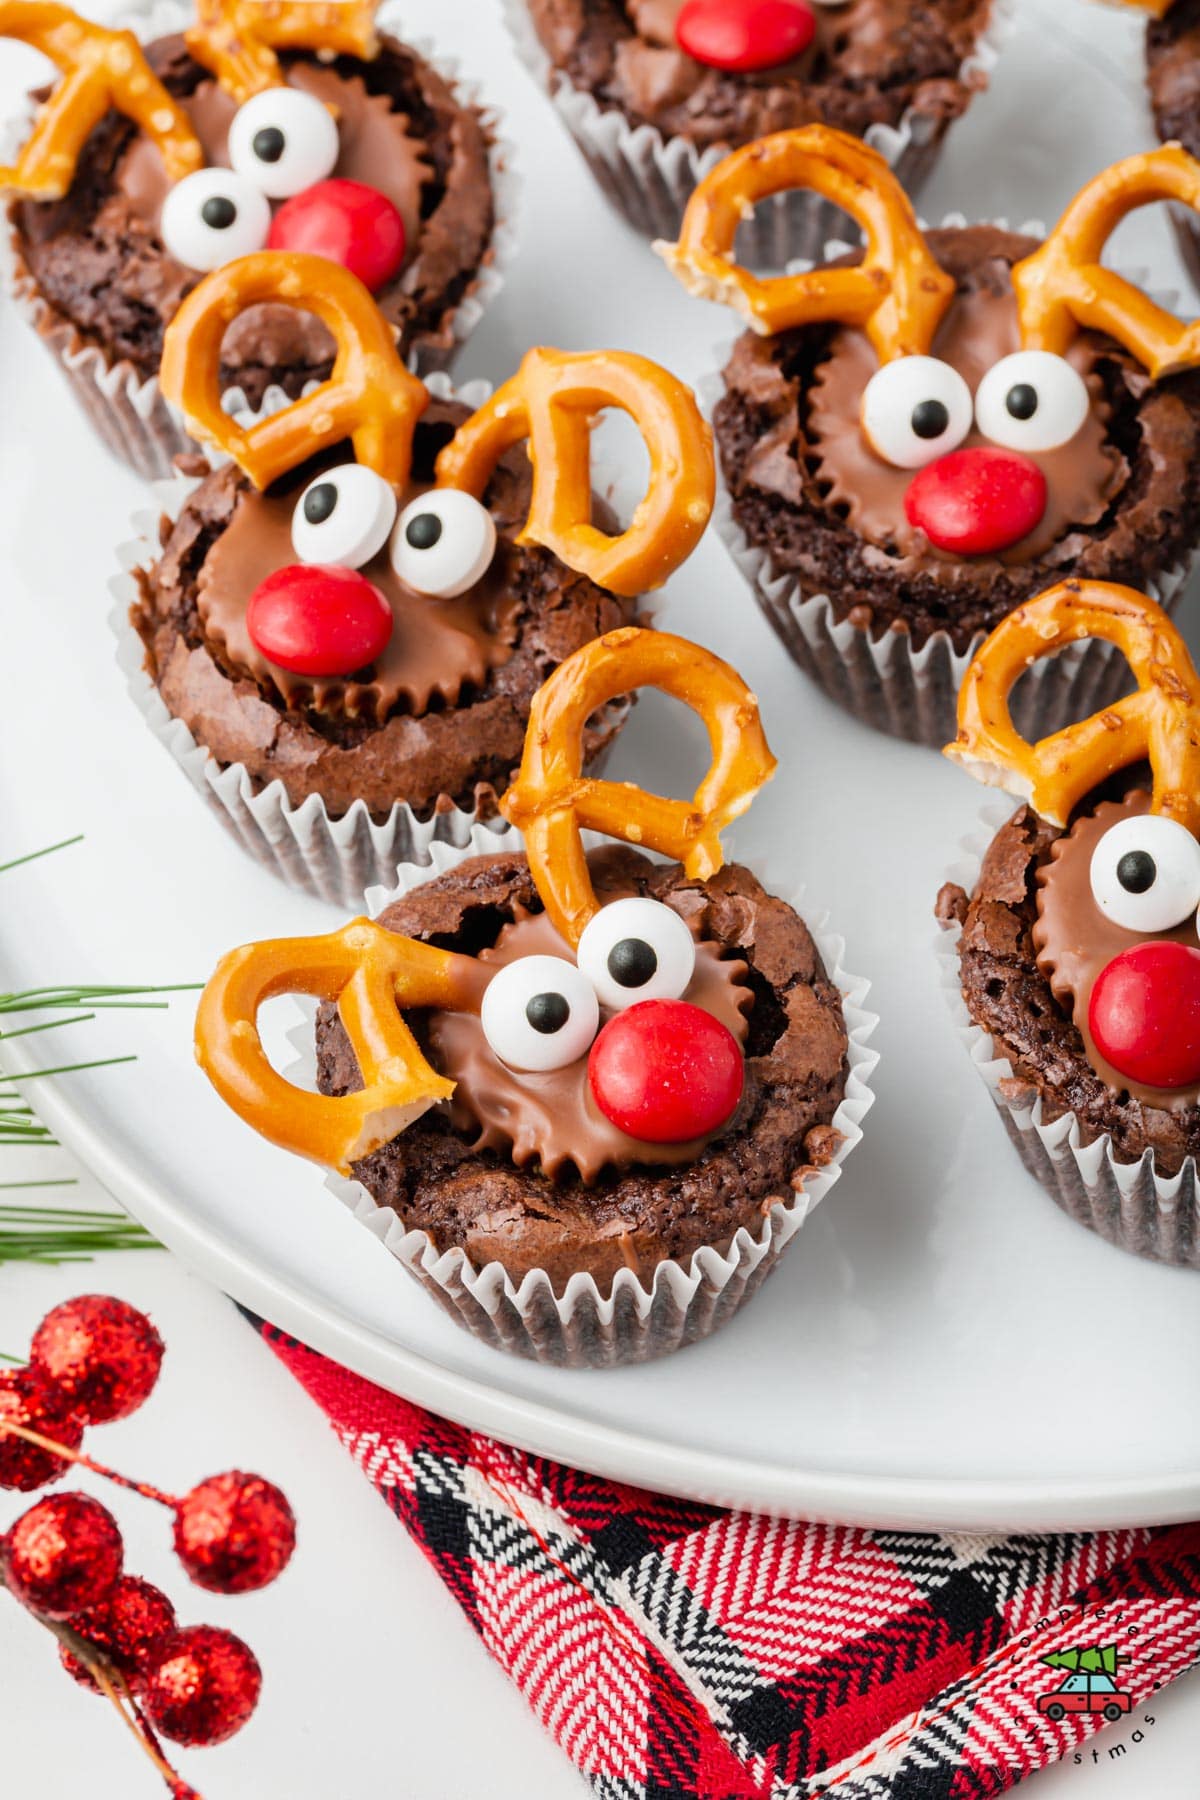 A tray of brownie cookie cups with a peanut butter cup made to look like a reindeer with pretzels for antlers and candies for the nose and eyes.